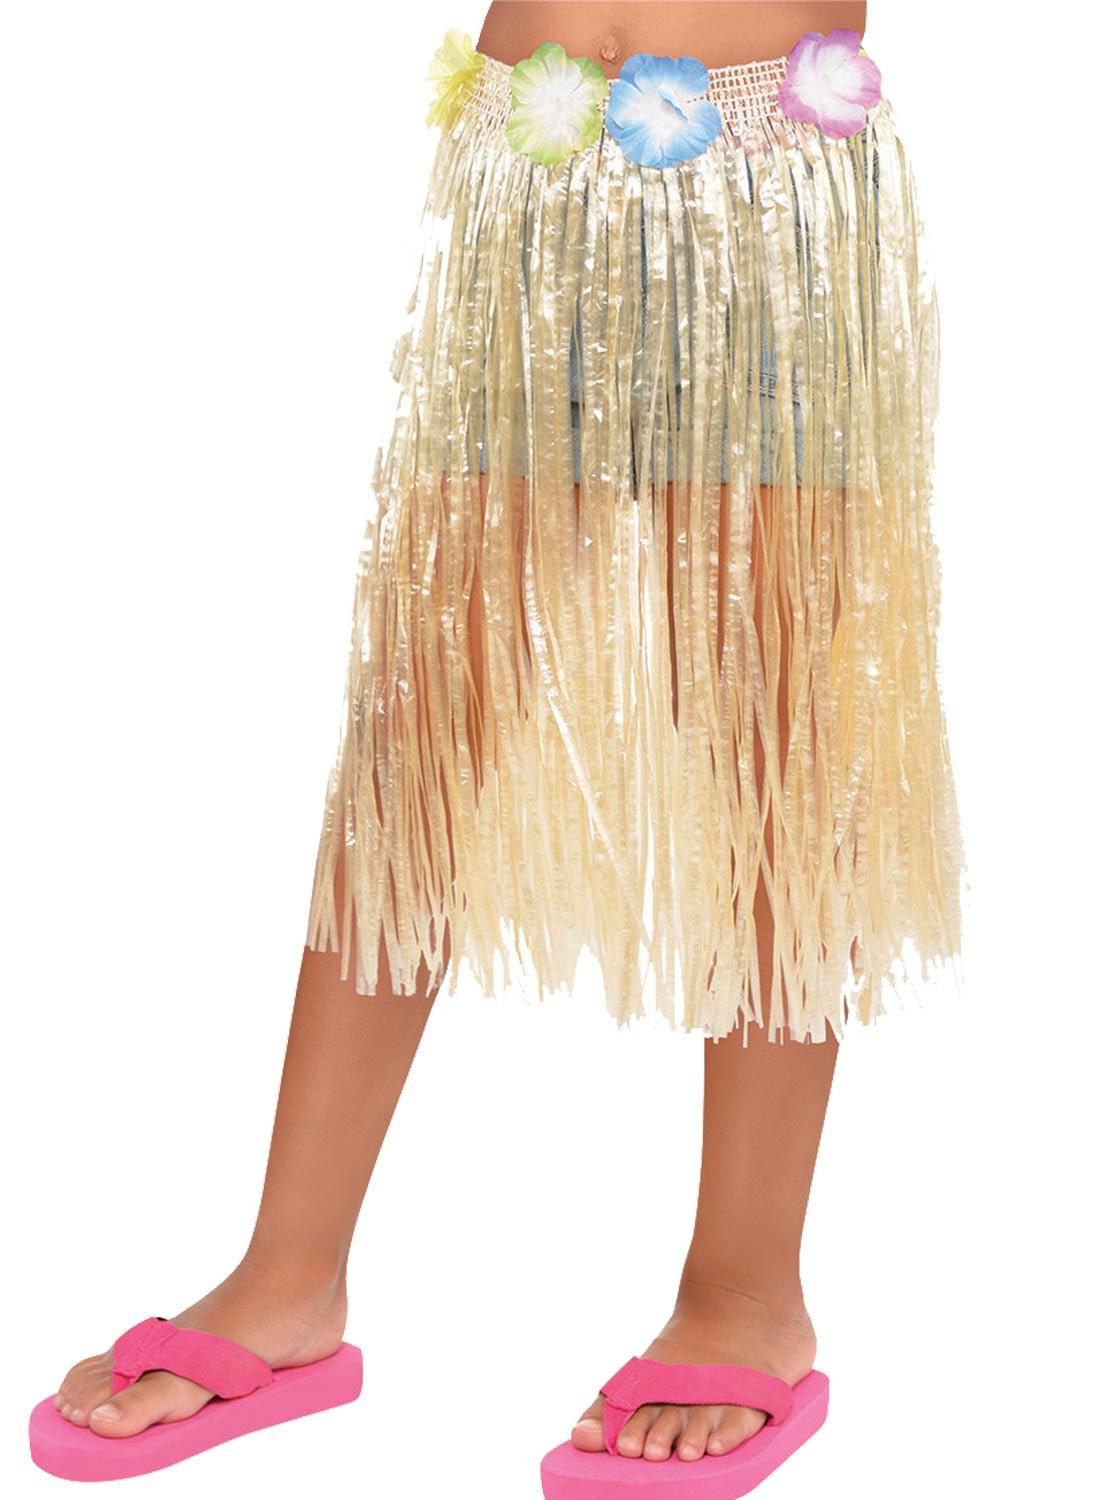 Hawaiian Natural Long Skirt Child Size 50cm x 55cm  by Amscan 340161 available here at Karnival Costumes online party shop